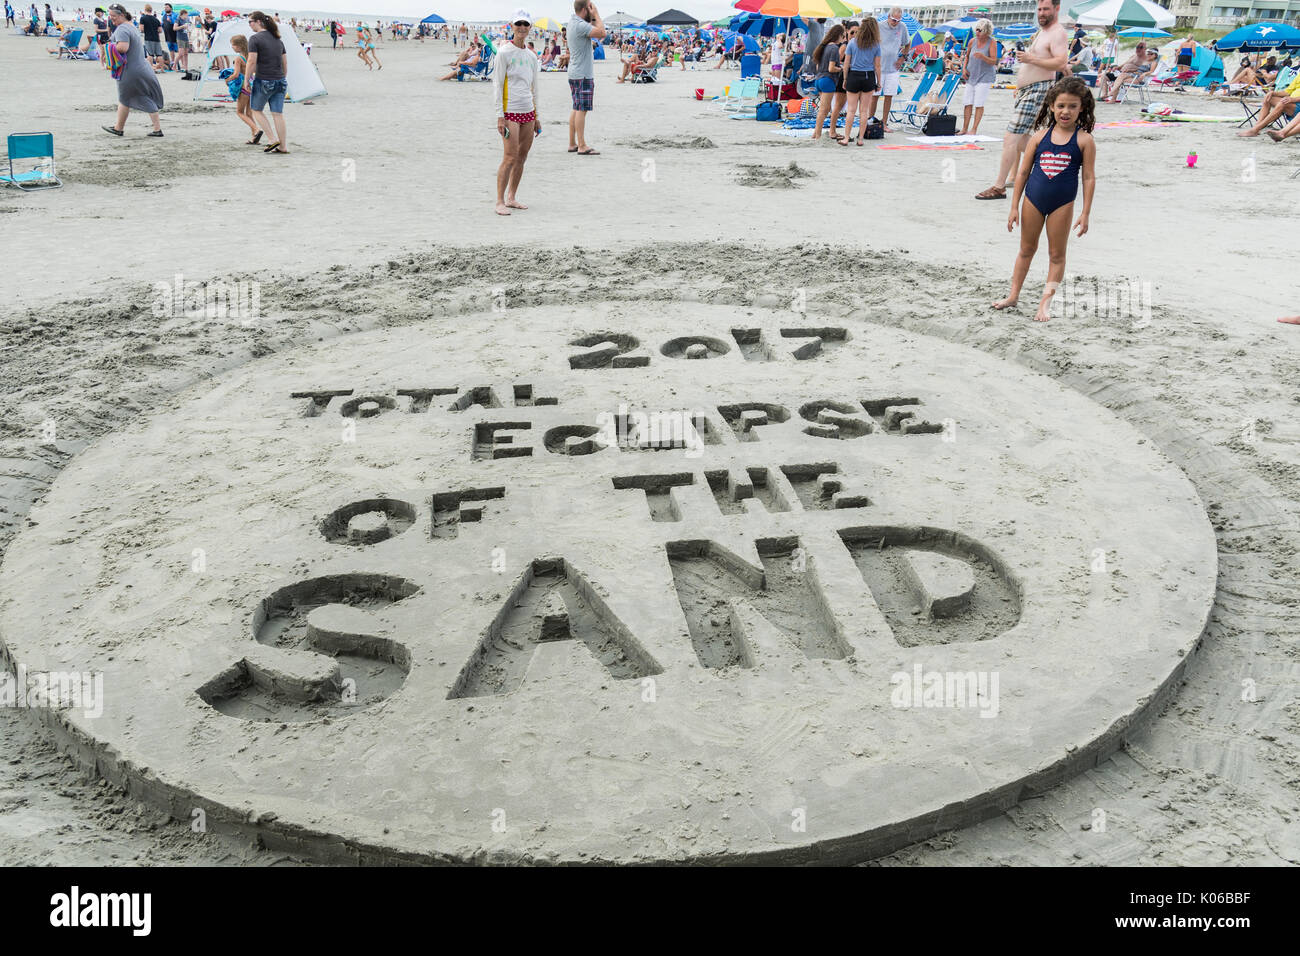 Charleston, Isle of Palms, USA. 21st Aug, 2017. A sand design celebrating the total solar eclipse as thousands gather on the beach outside Charleston August 21, 2017 in Isle of Palms, South Carolina. The solar eclipse after sweeping across the nation crosses the Charleston area before heading over the Atlantic Ocean. Credit: Planetpix/Alamy Live News Stock Photo